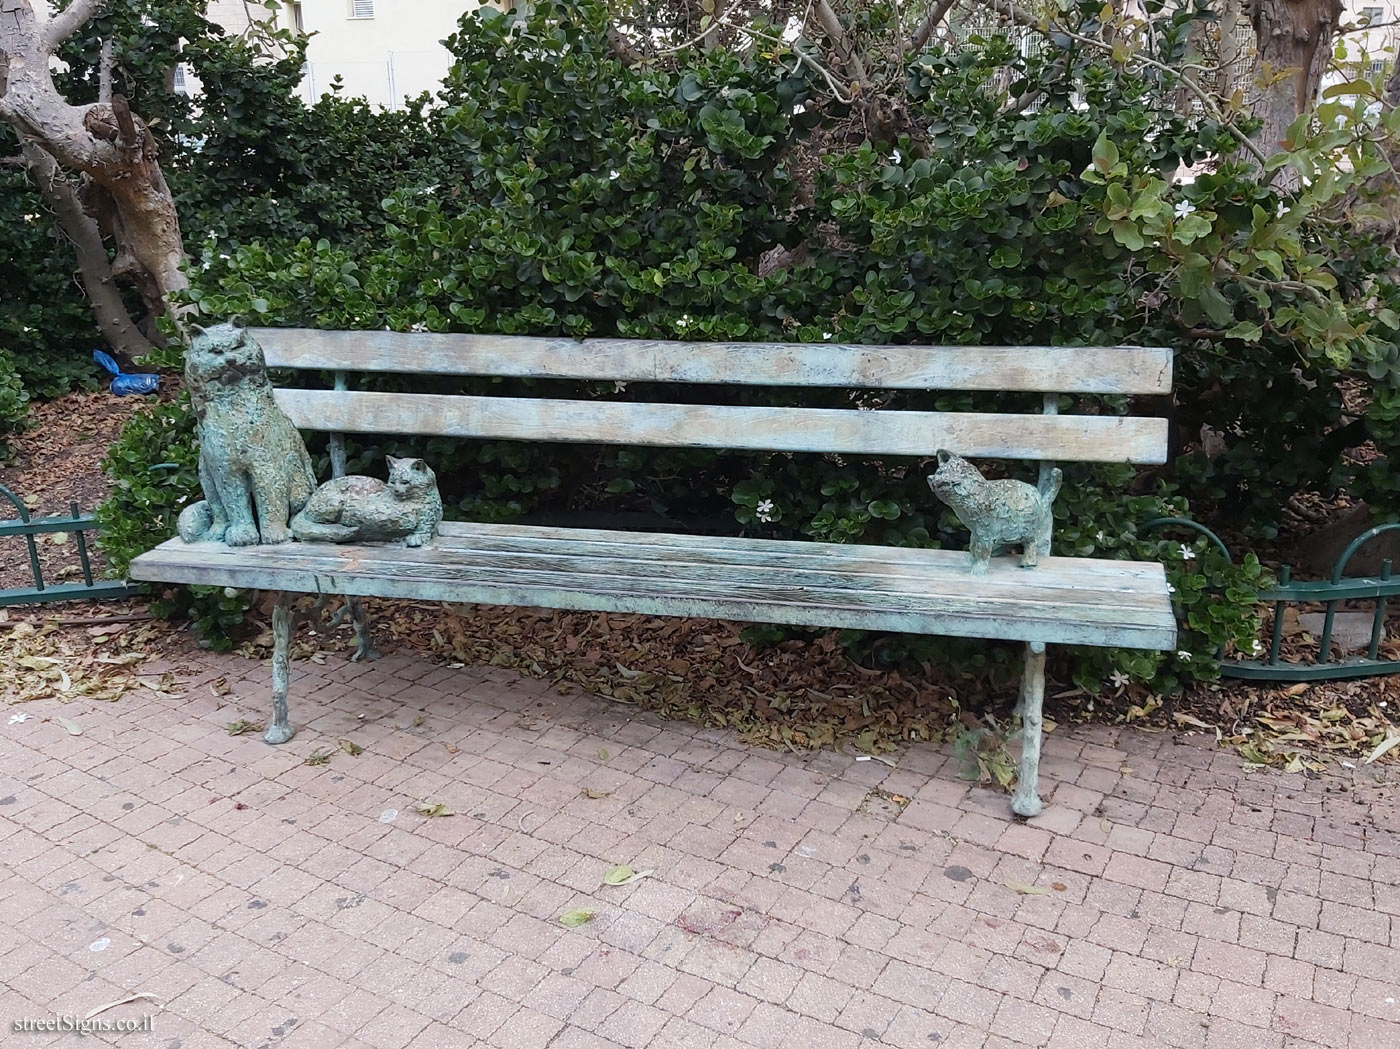 Holon - Story Garden - Two cats on one bench - Nurit St 9, Holon, Israel